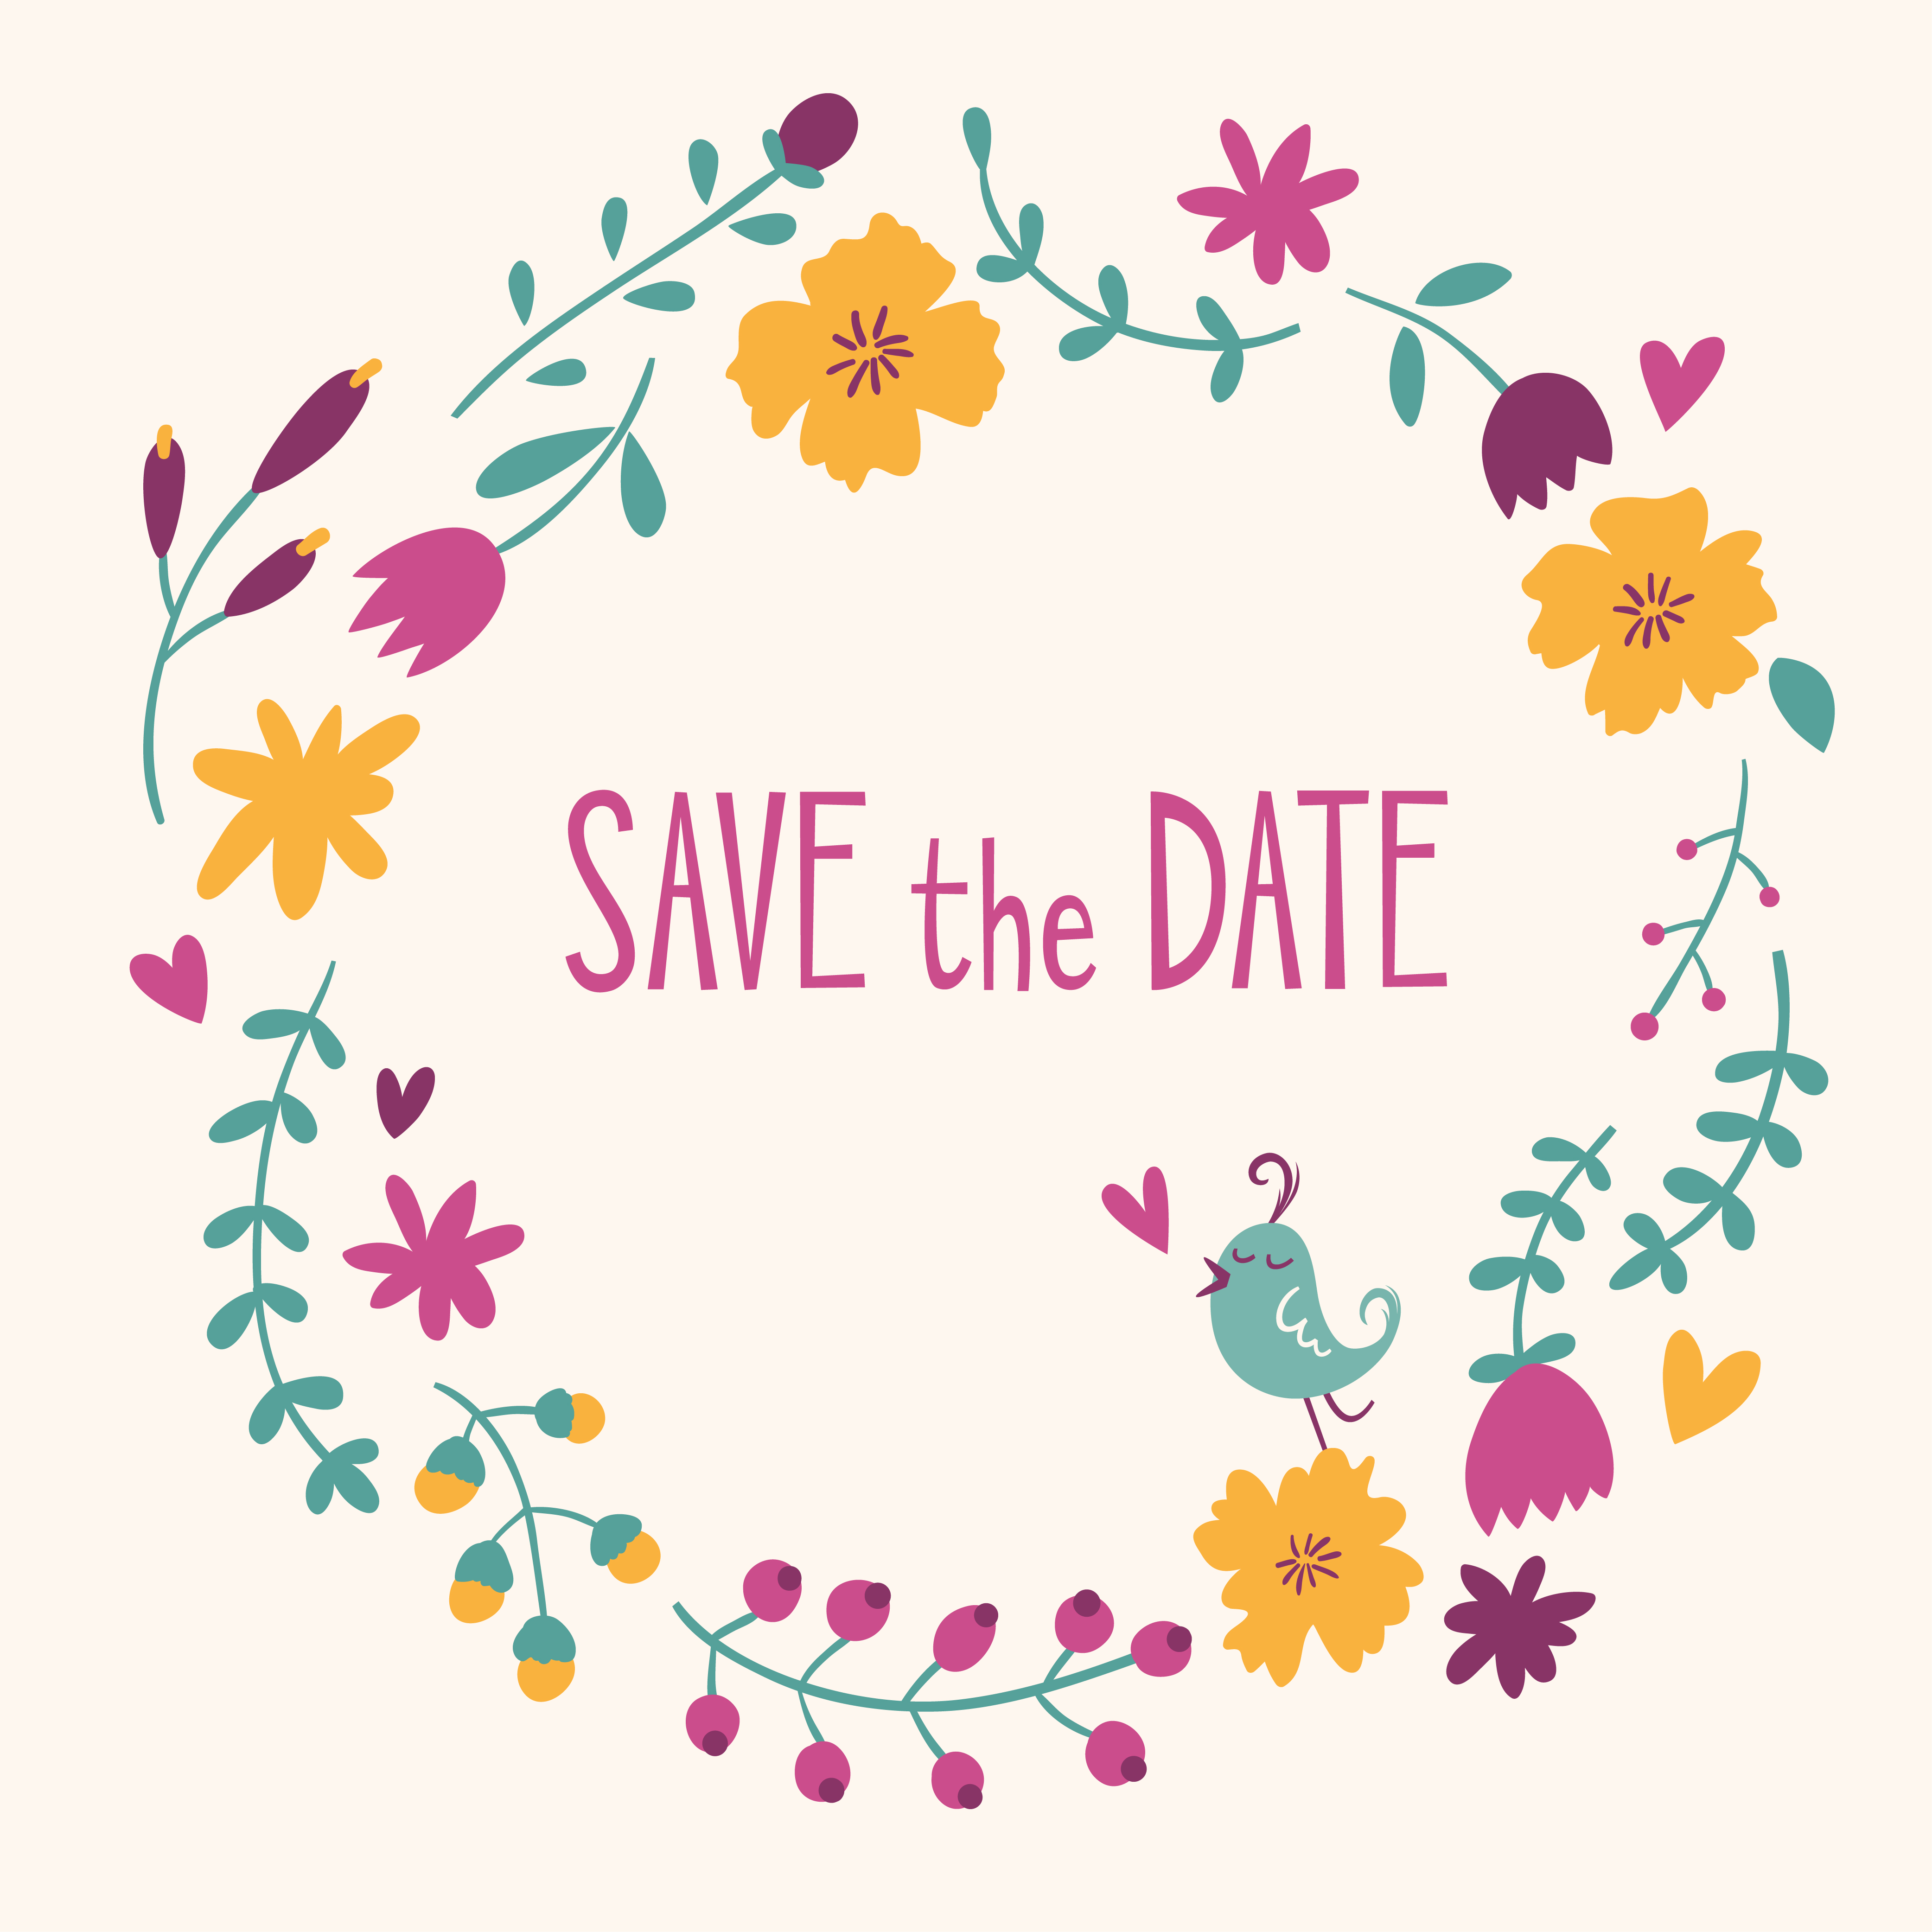 Save the date vector card Photoshop brush